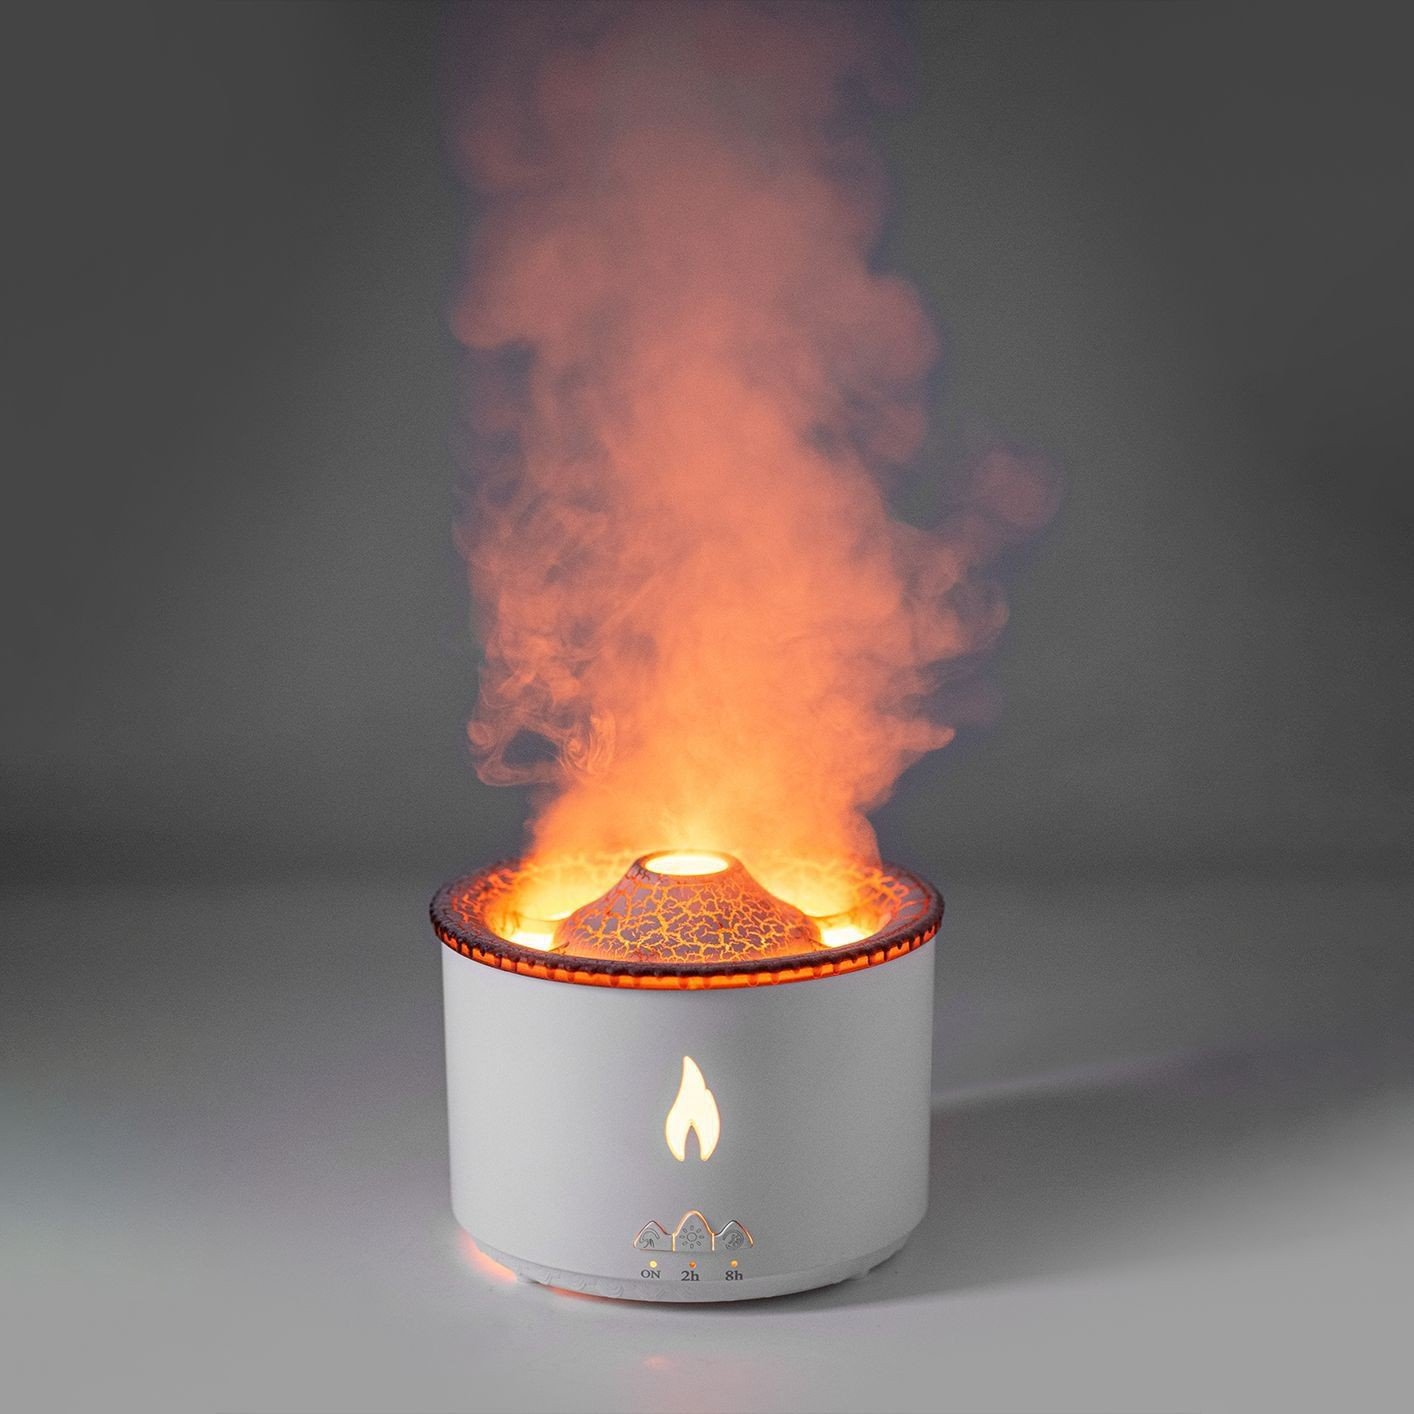 Air humidifier with volcano flame - Dr.electronix